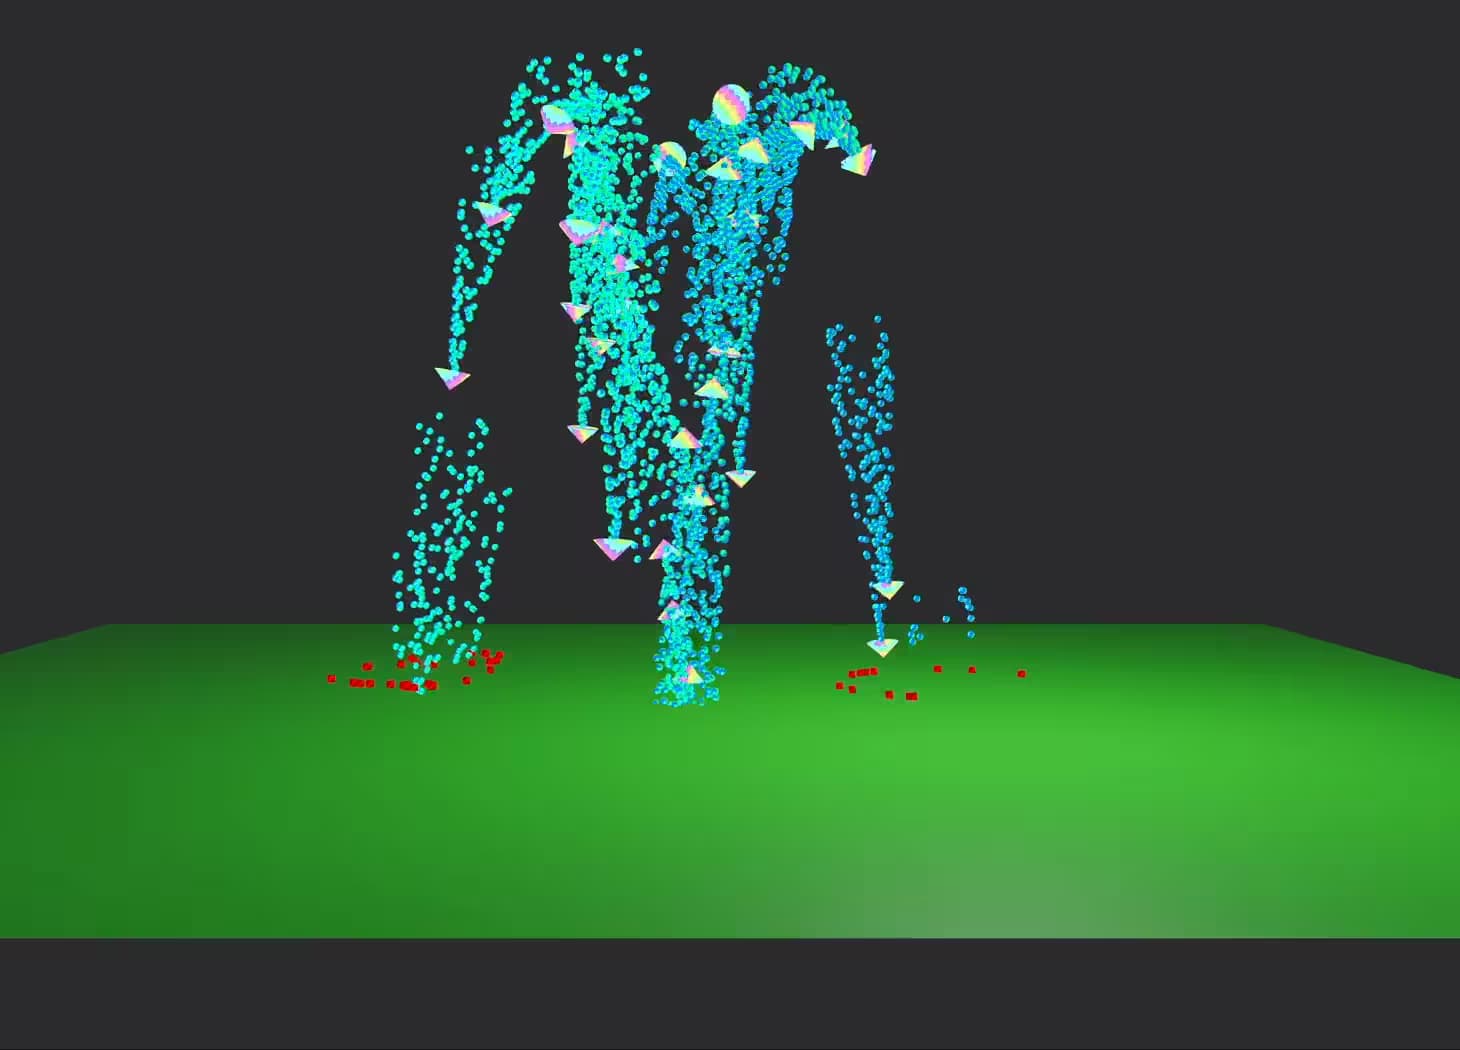 A fountain of particles